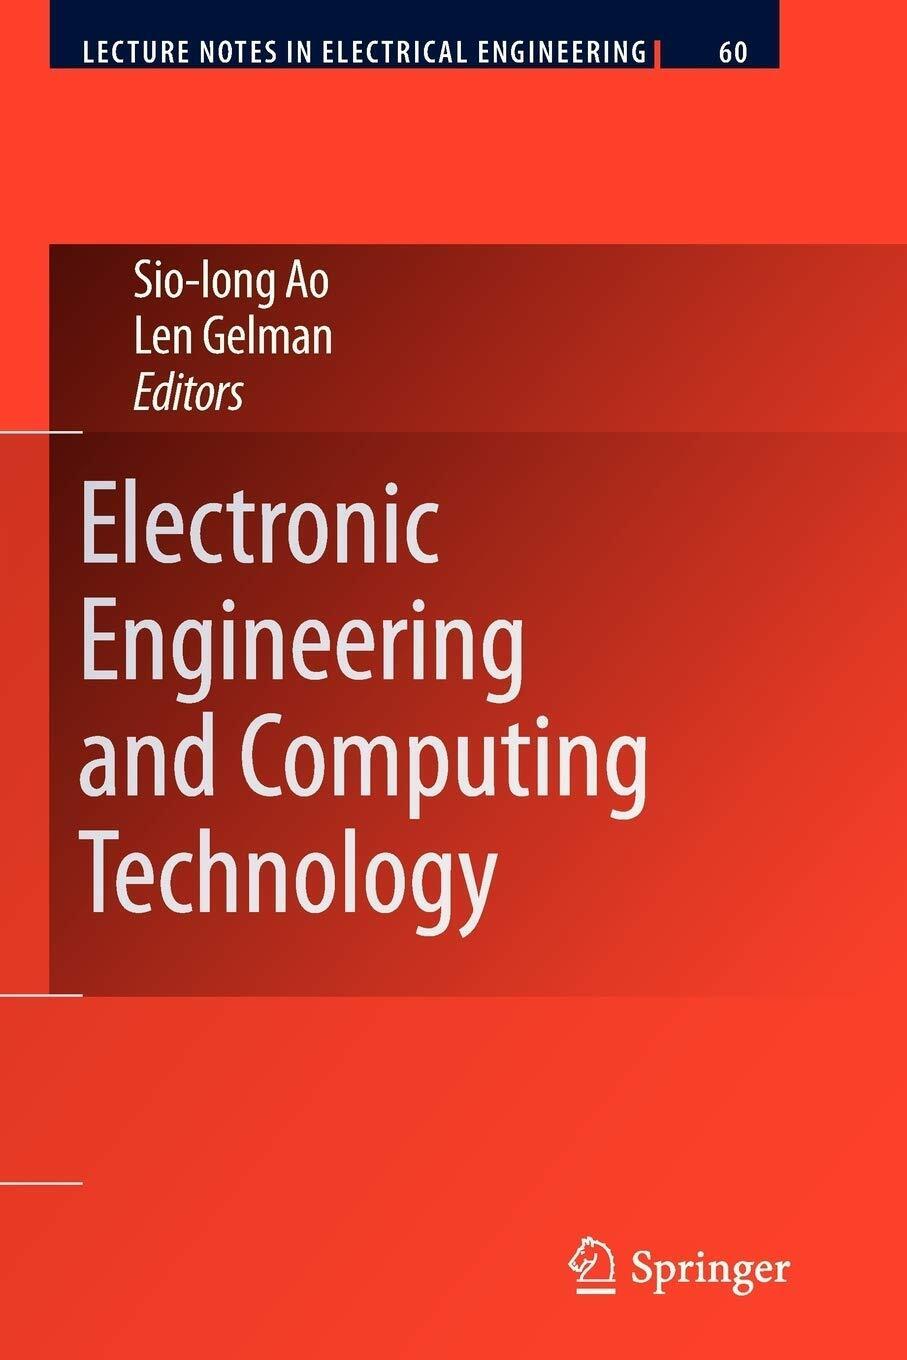 Electronic Engineering and Computing Technology - Len Gelman - Springer, 2012